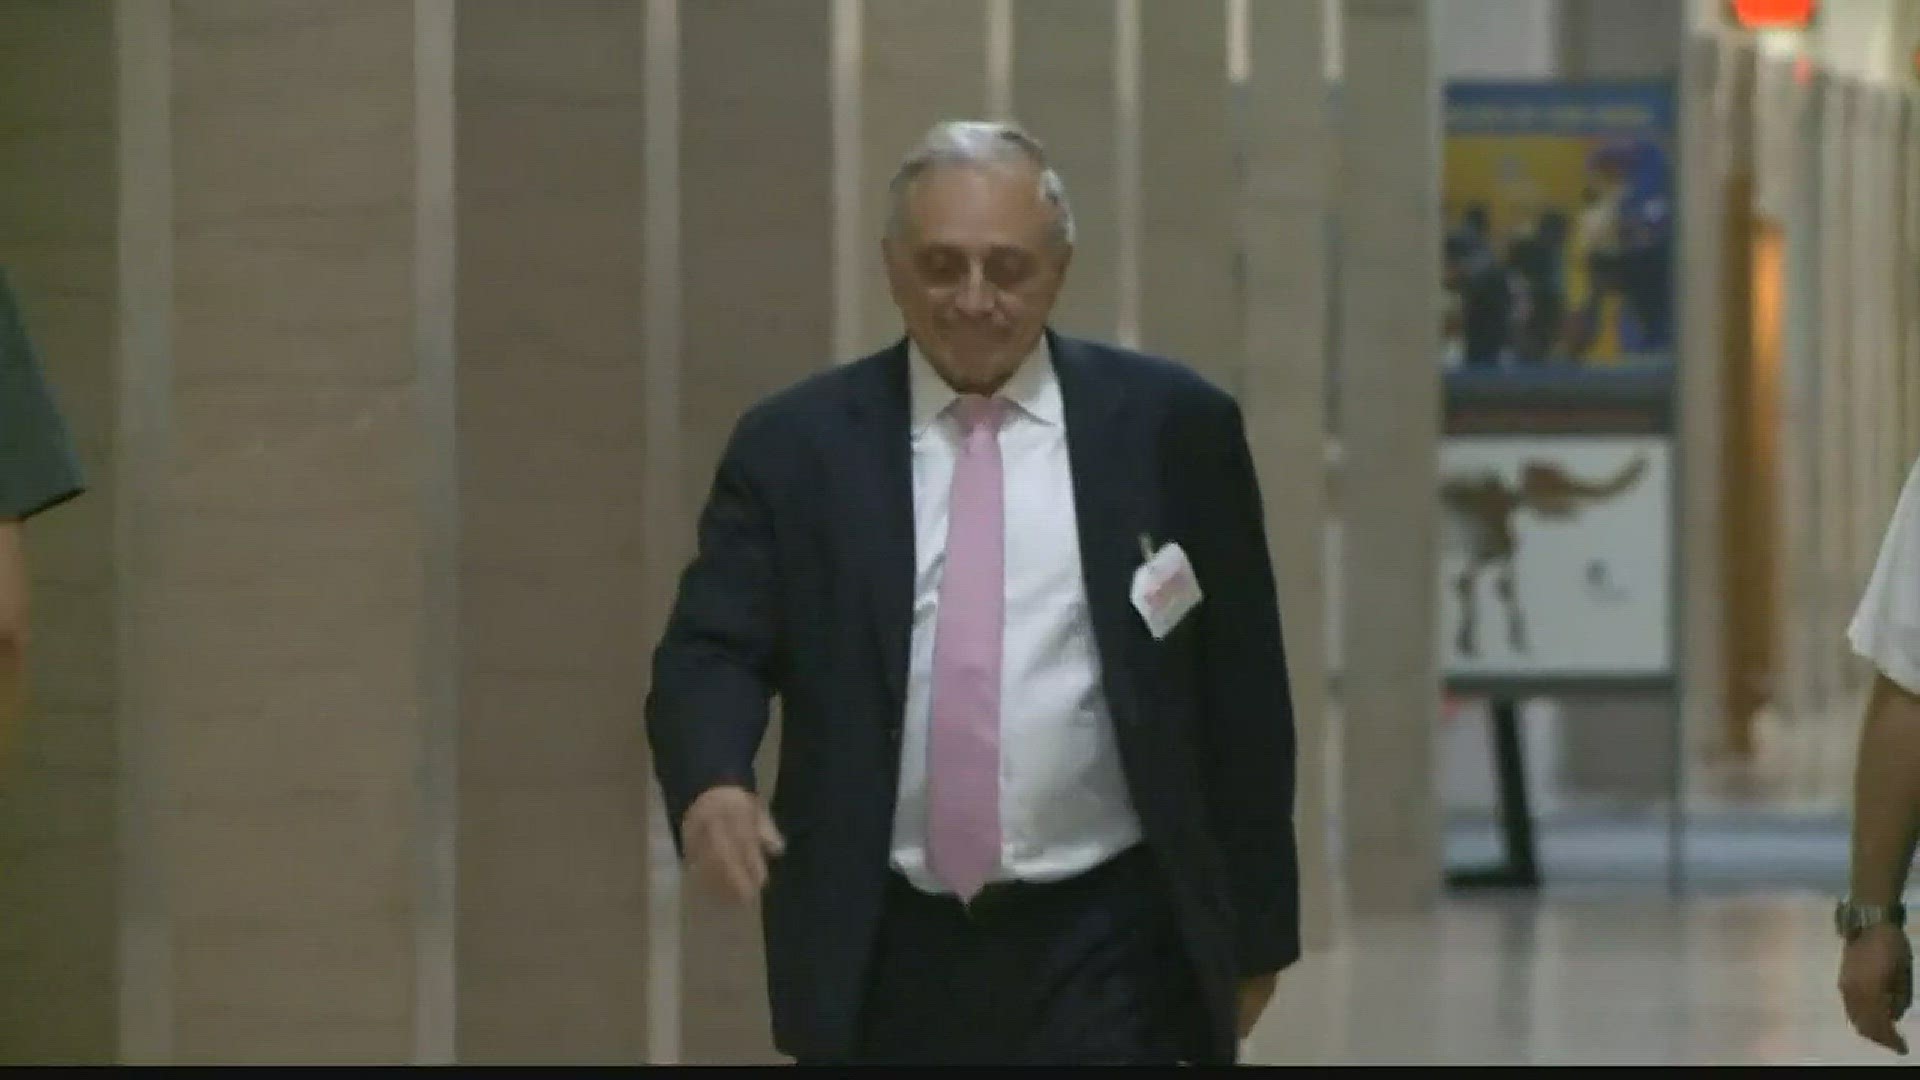 Carl Paladino To Be Removed From School Board